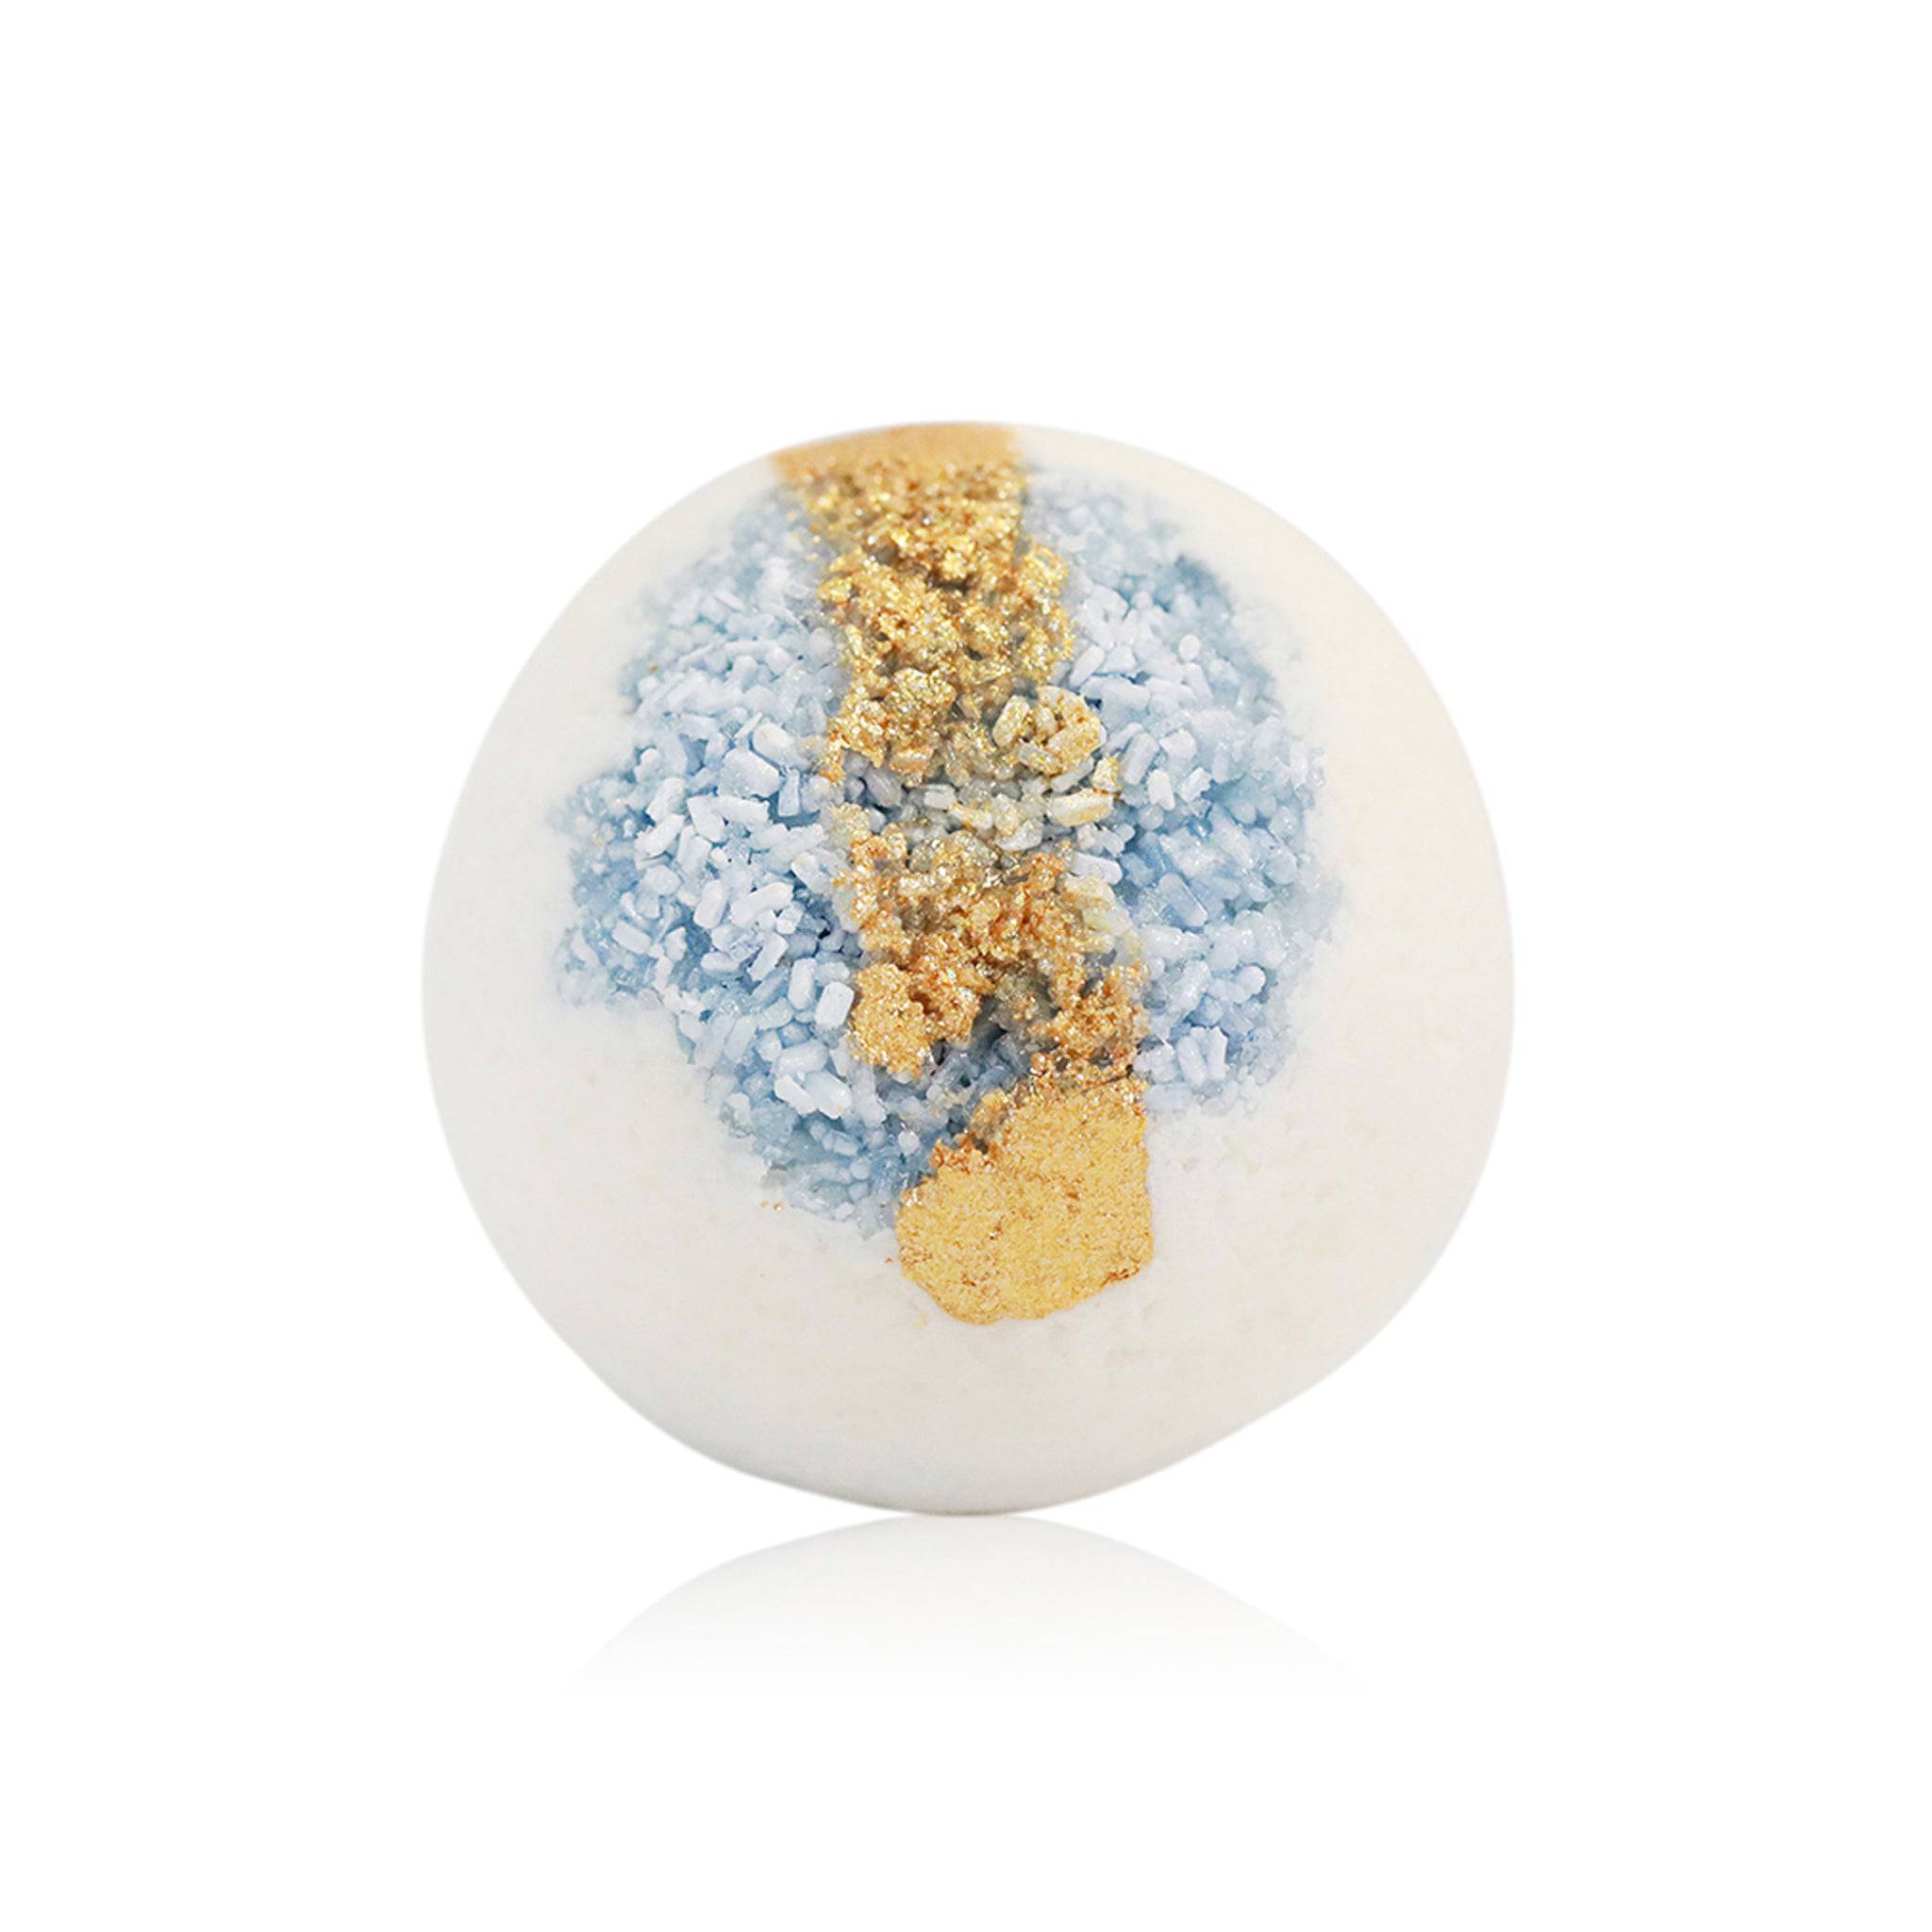 Crystal Geode Bath Bomb - Celestine - The Gilded Witch